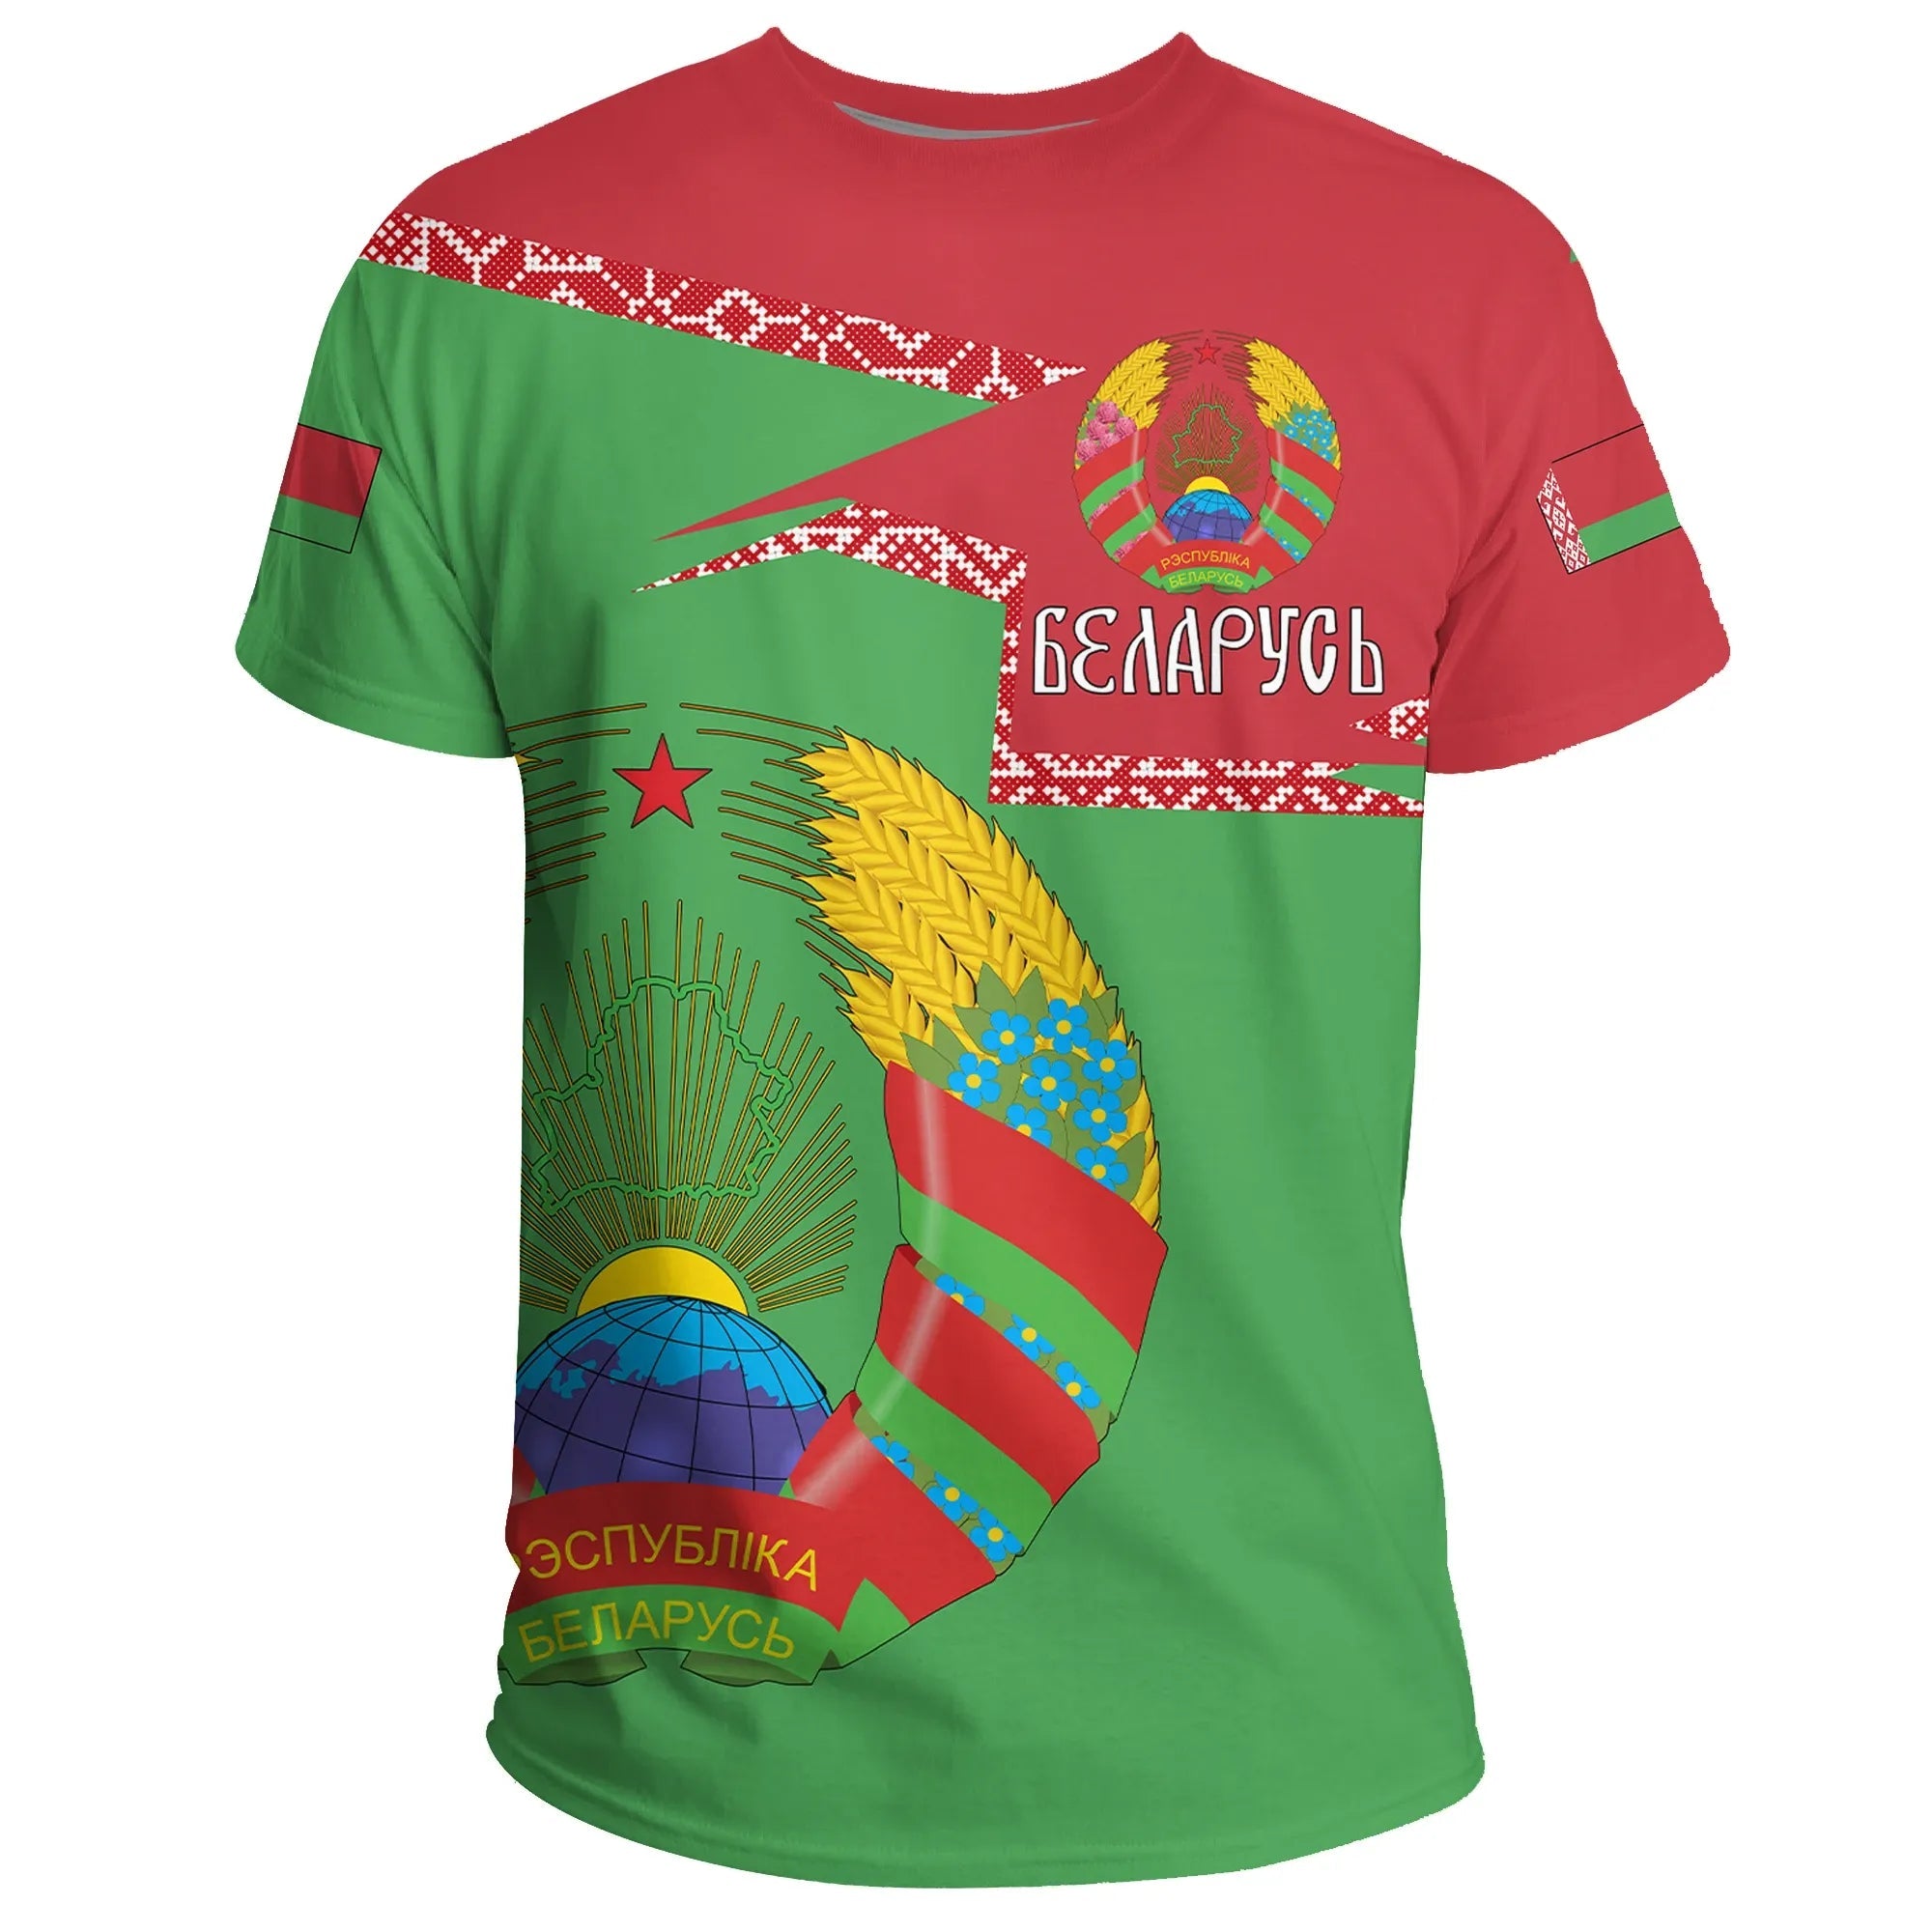 belarus-coat-of-arms-t-shirt-new-style